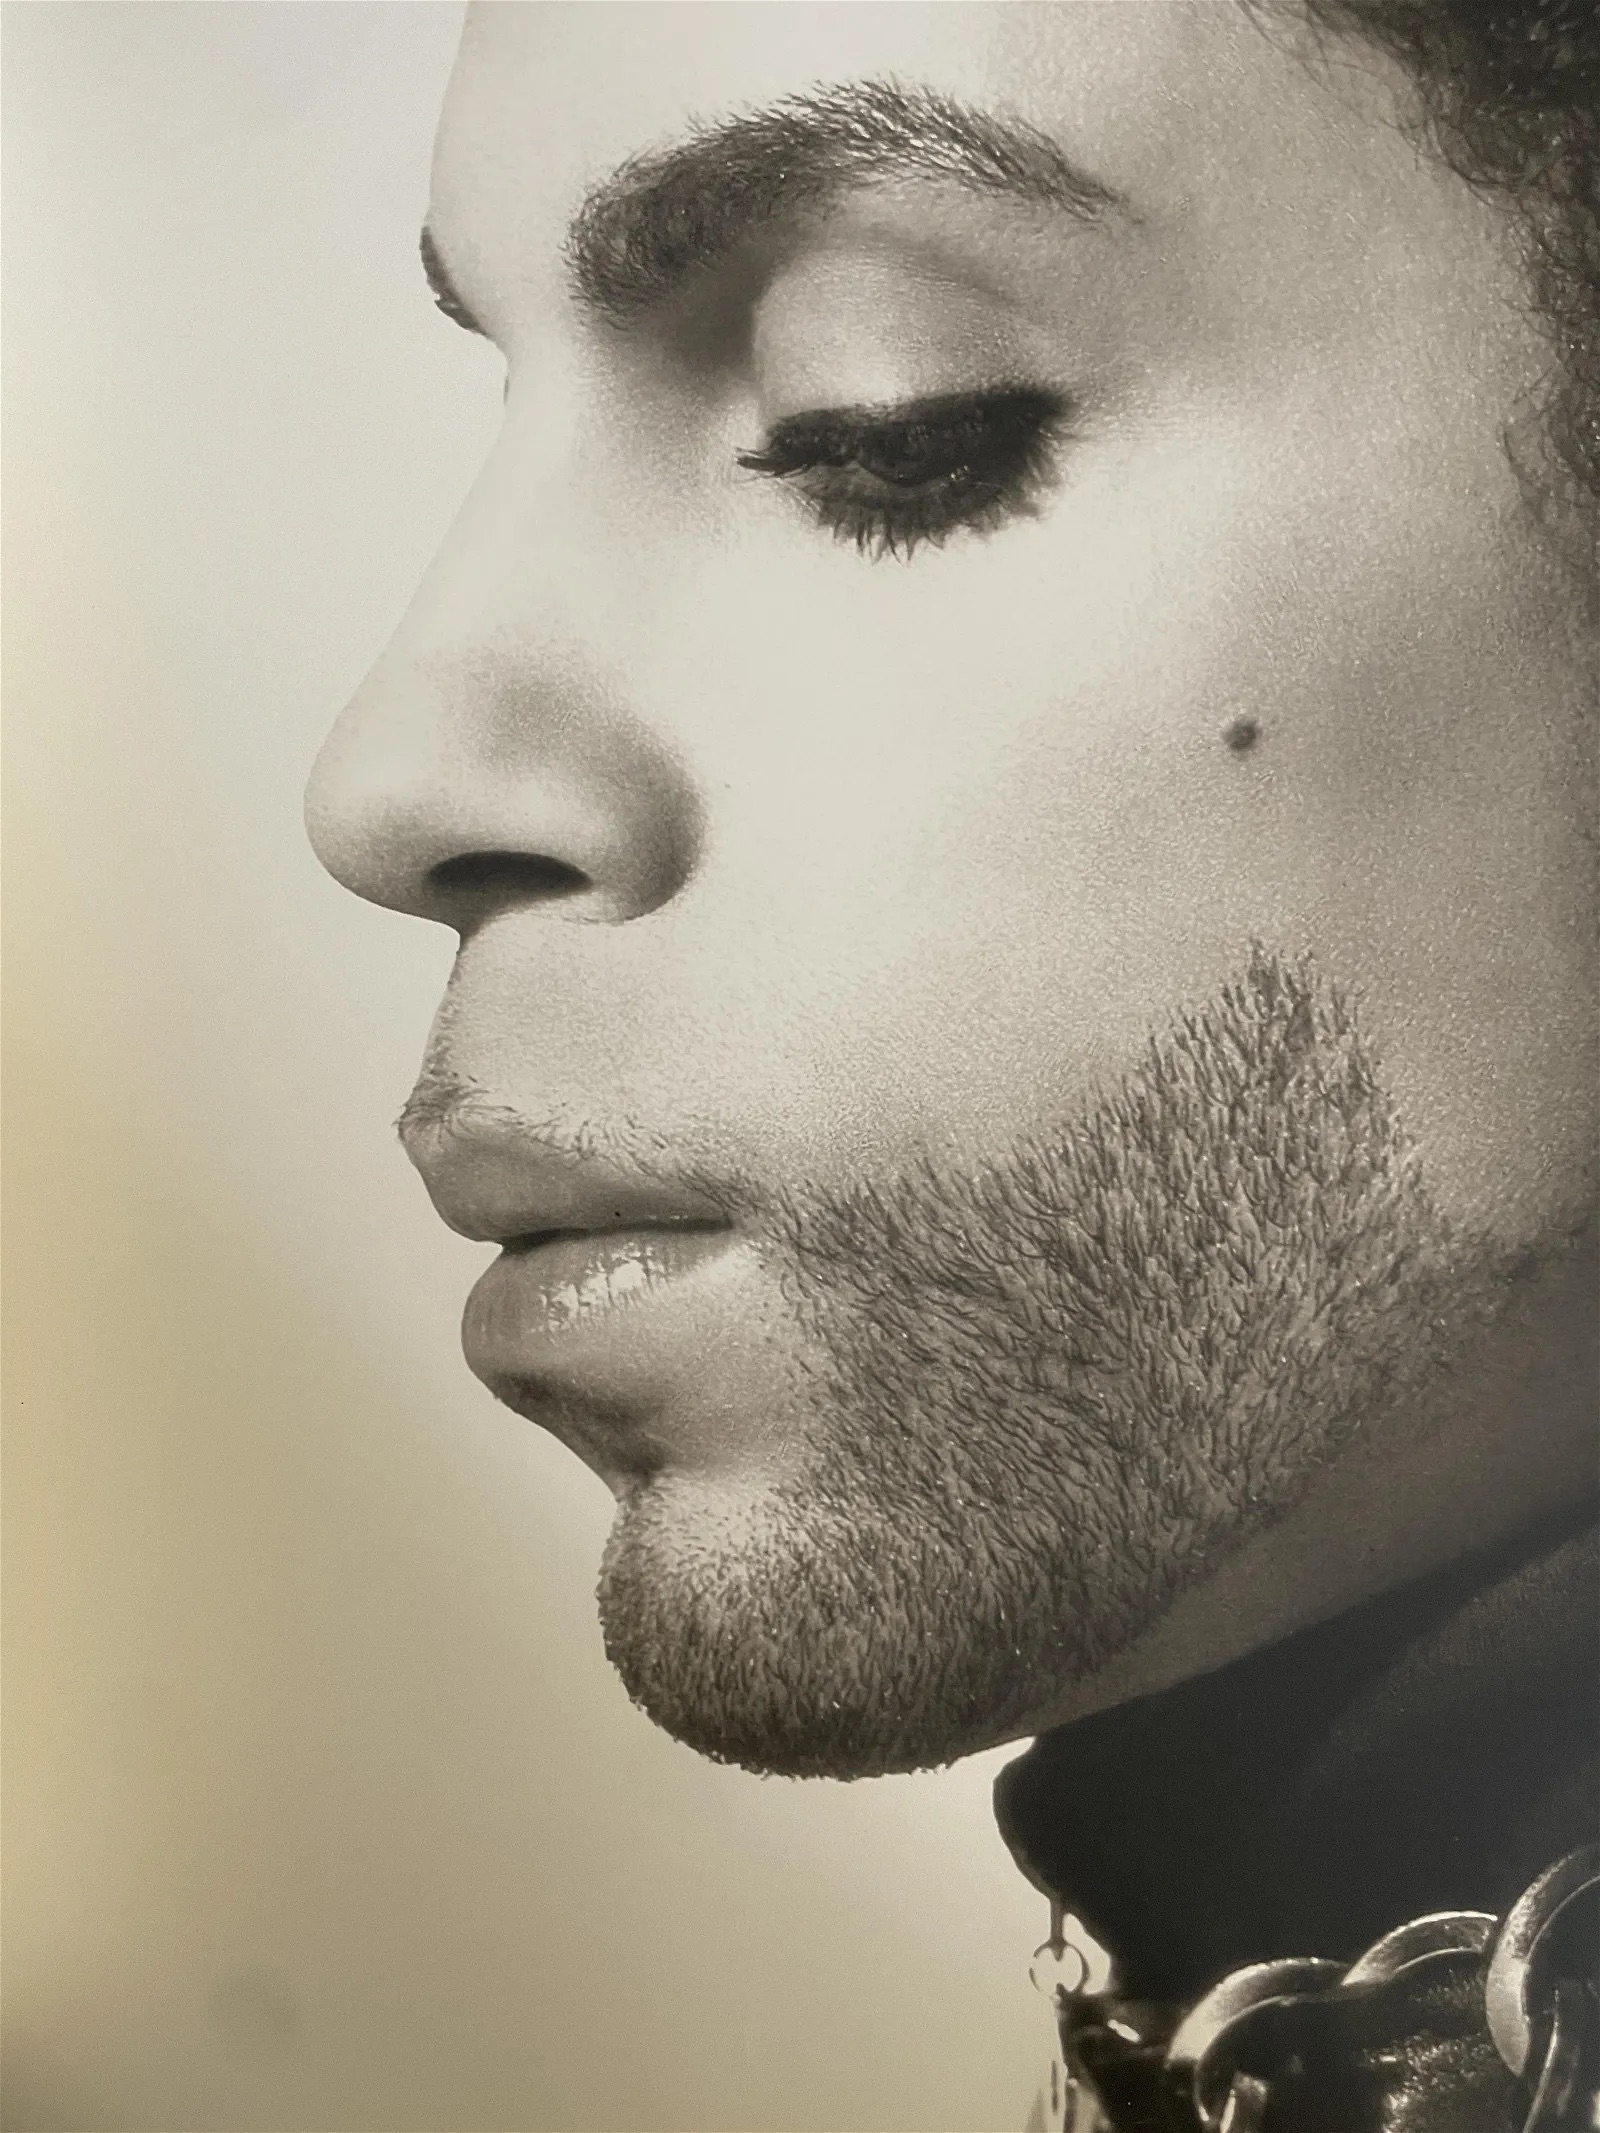 Herb Ritts "Prince, Minneapolis, 1991" Print - Image 4 of 6